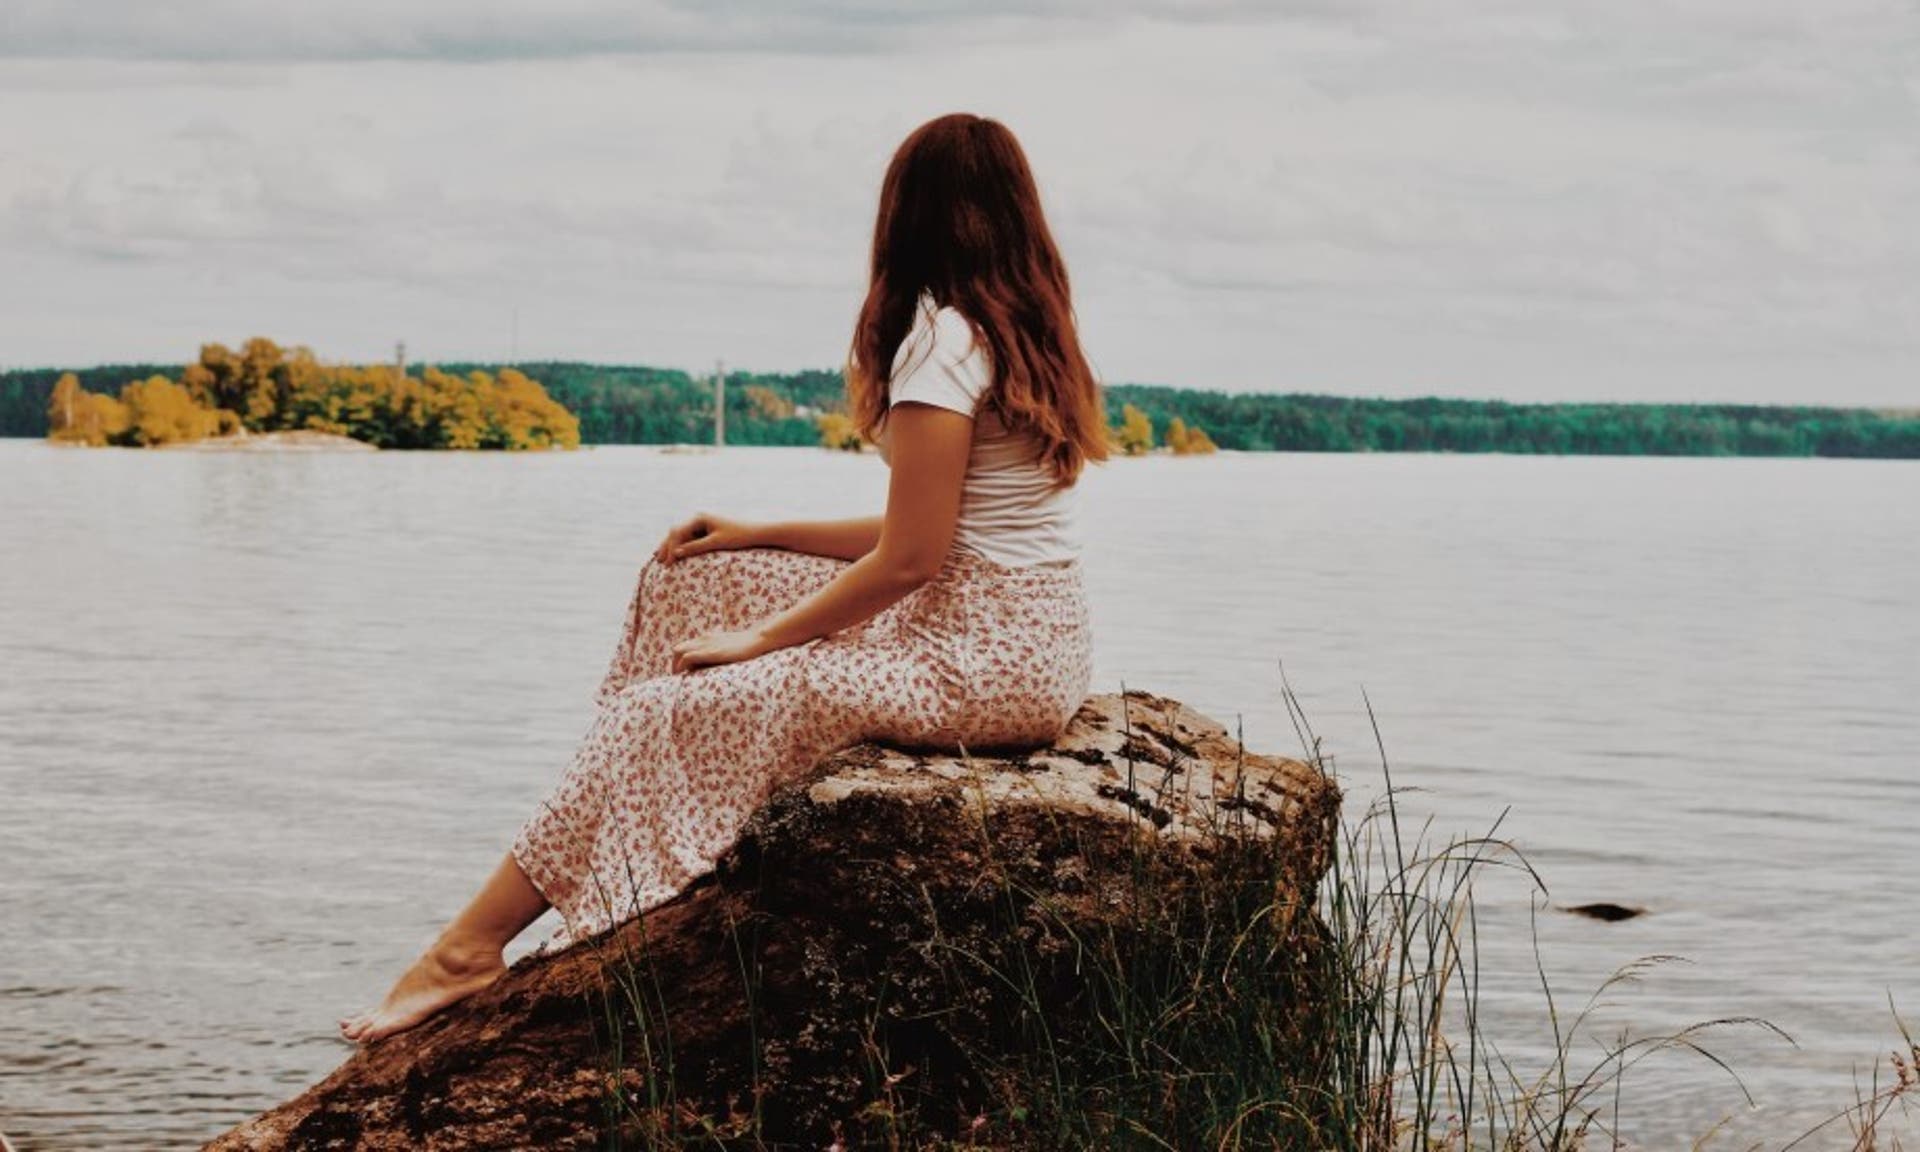  image of a woman sat on a rock, wearing a white top with a red and white floral skirt and looking out over a scenic lake. 